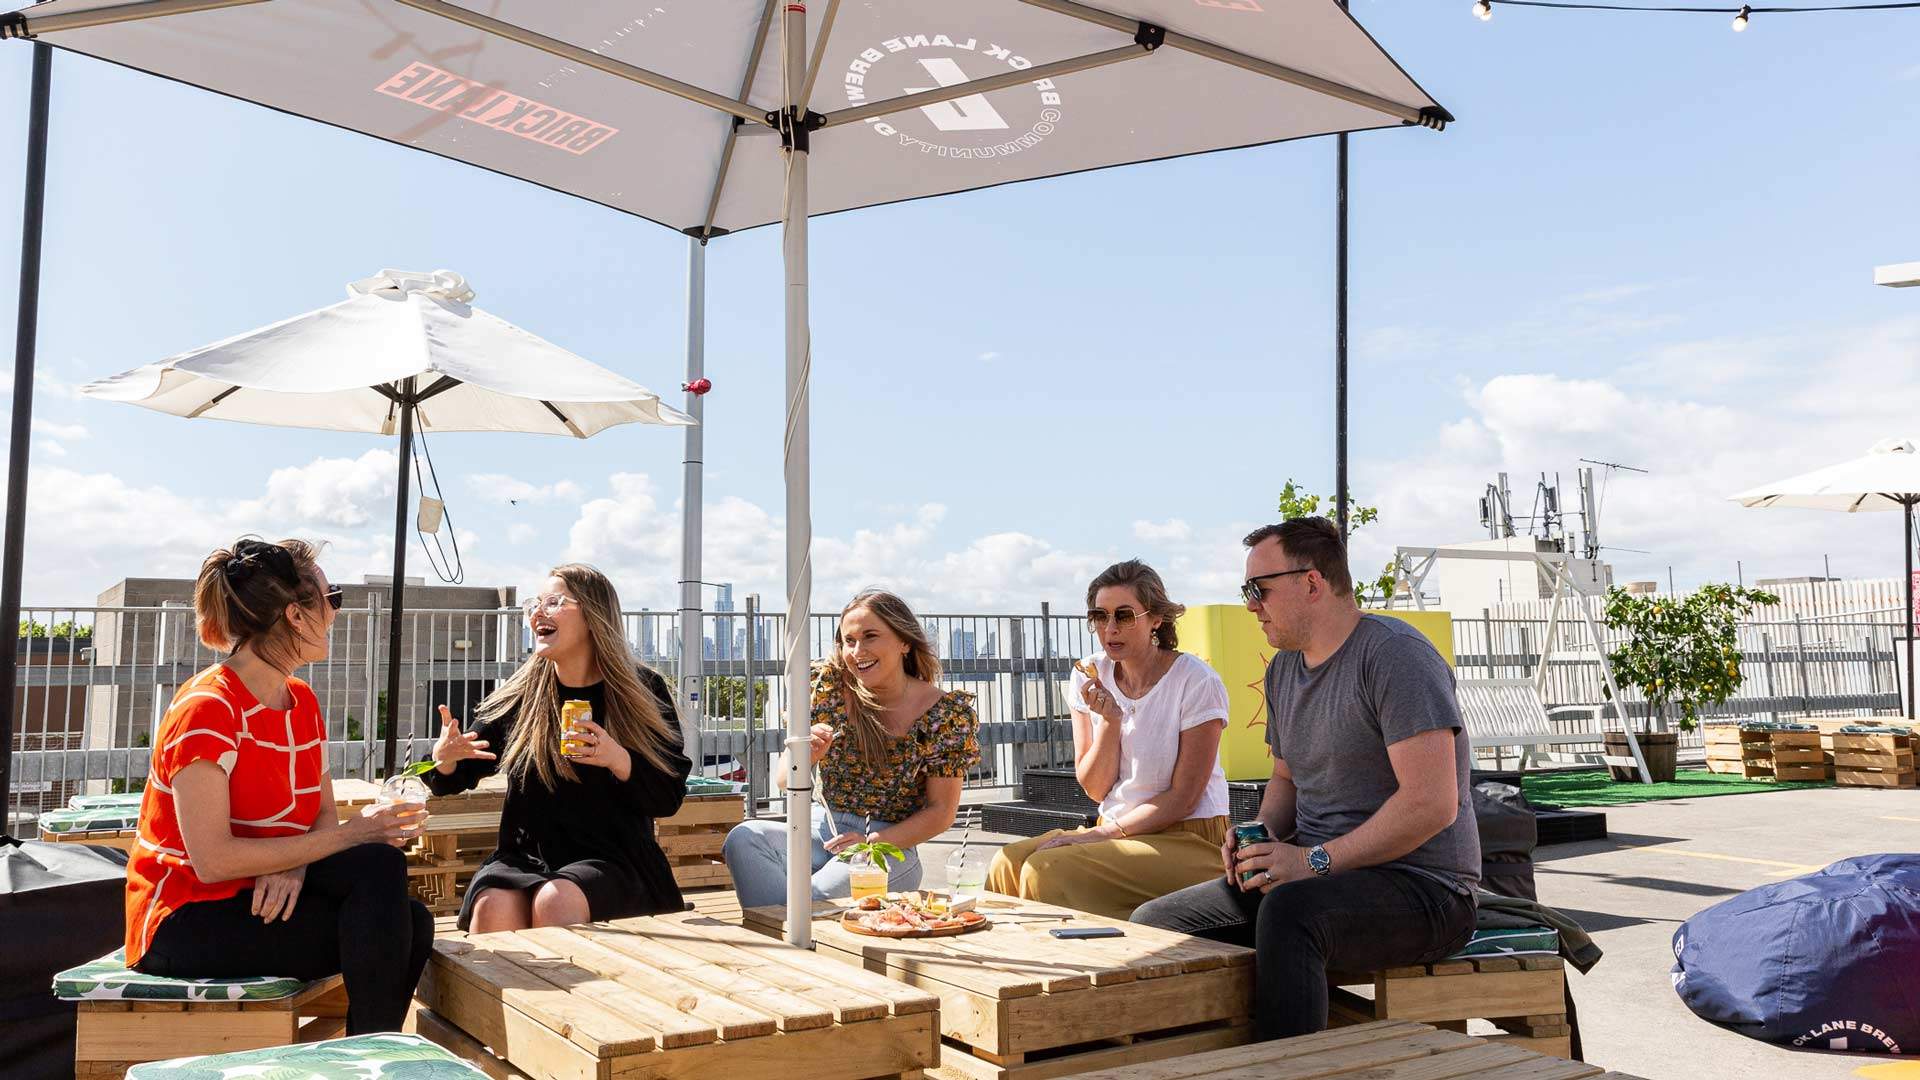 An Openair Beer Garden Has Landed on the Rooftop of The Prince Hotel's Car Park